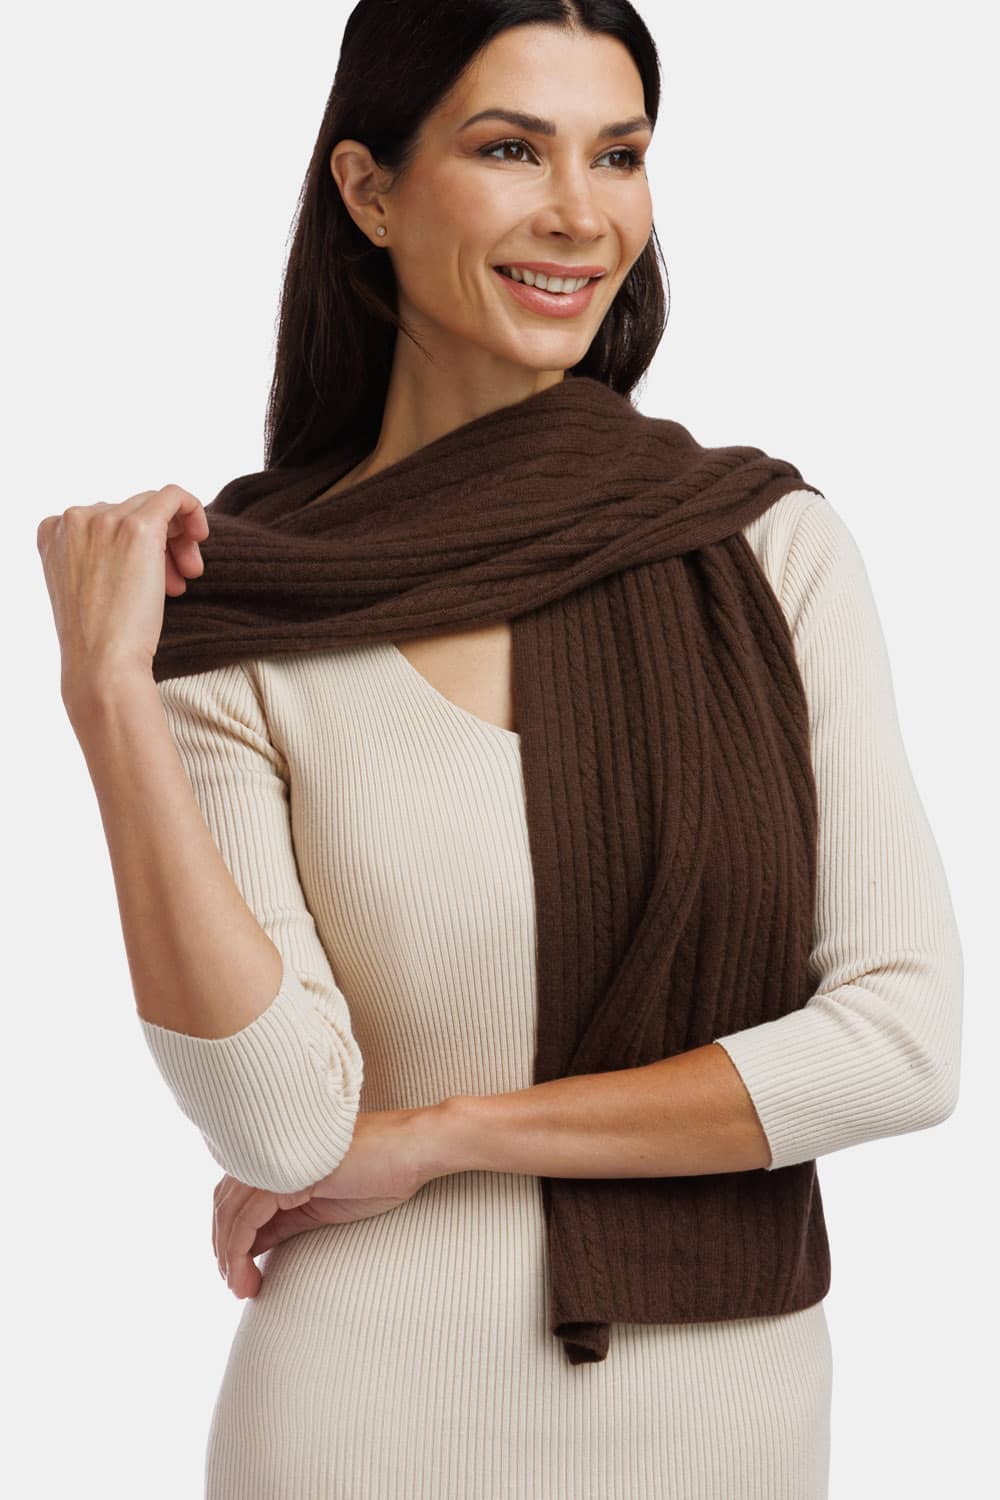 Women's Cable Knit Cashmere Scarf, Gift Ready